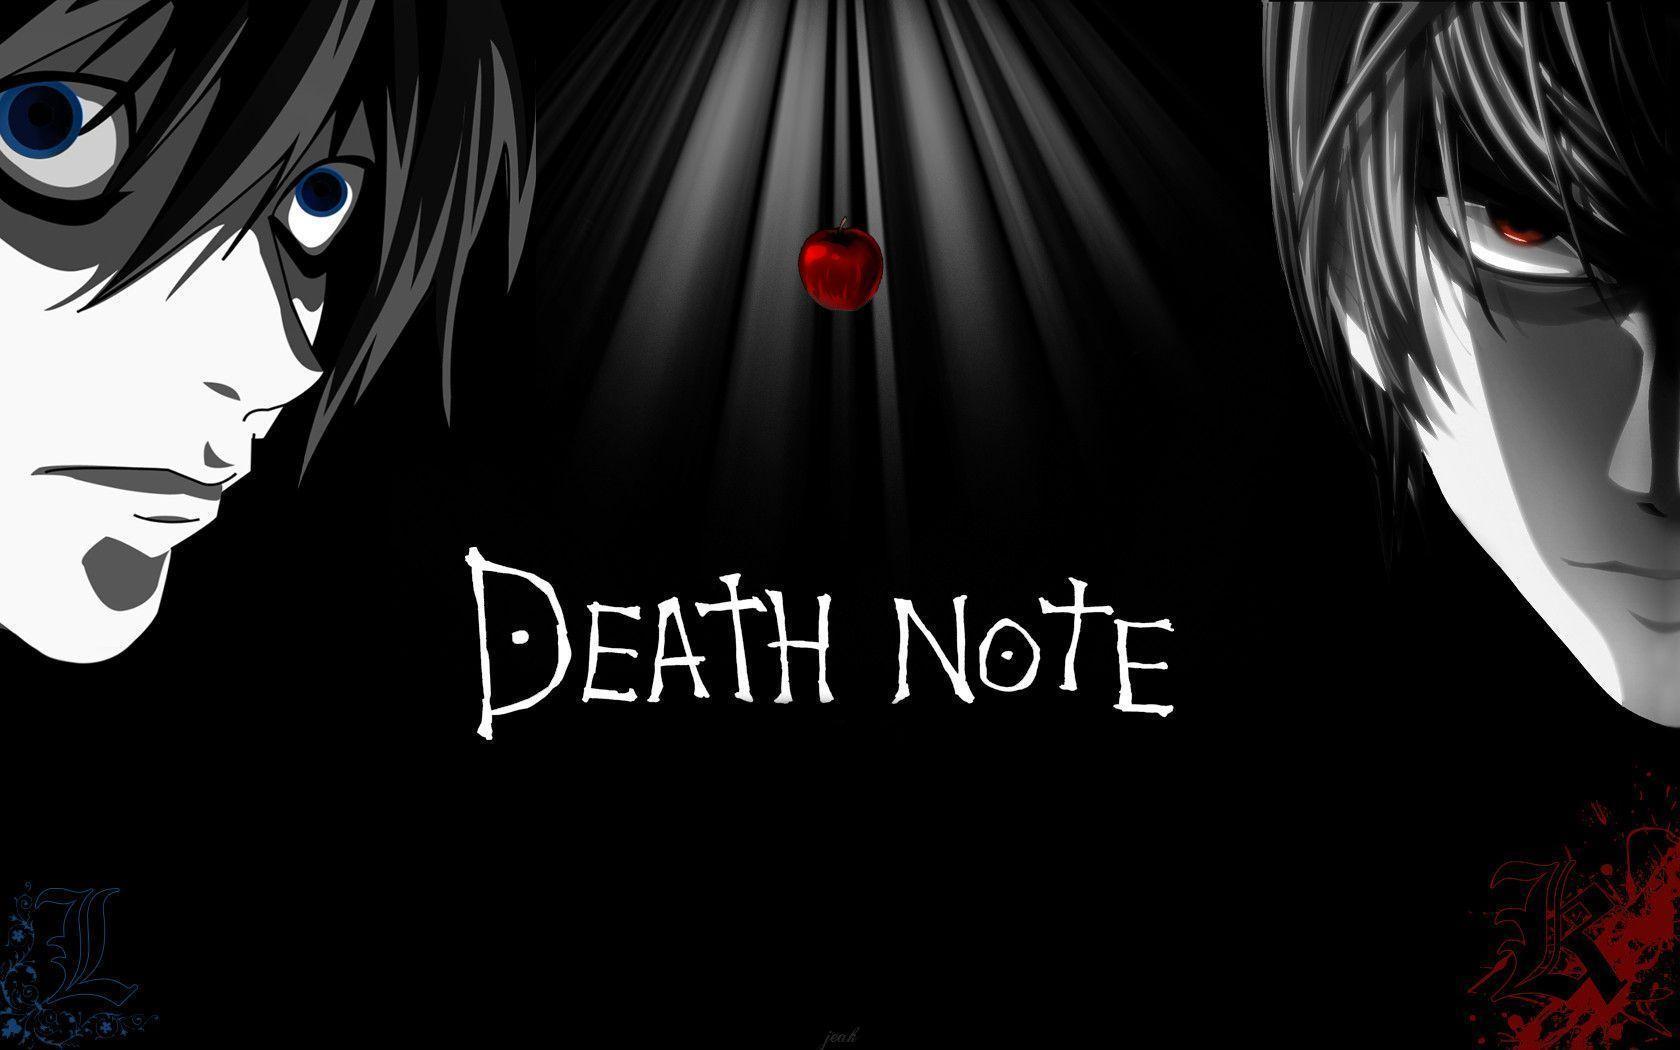 When did Death Note come out?